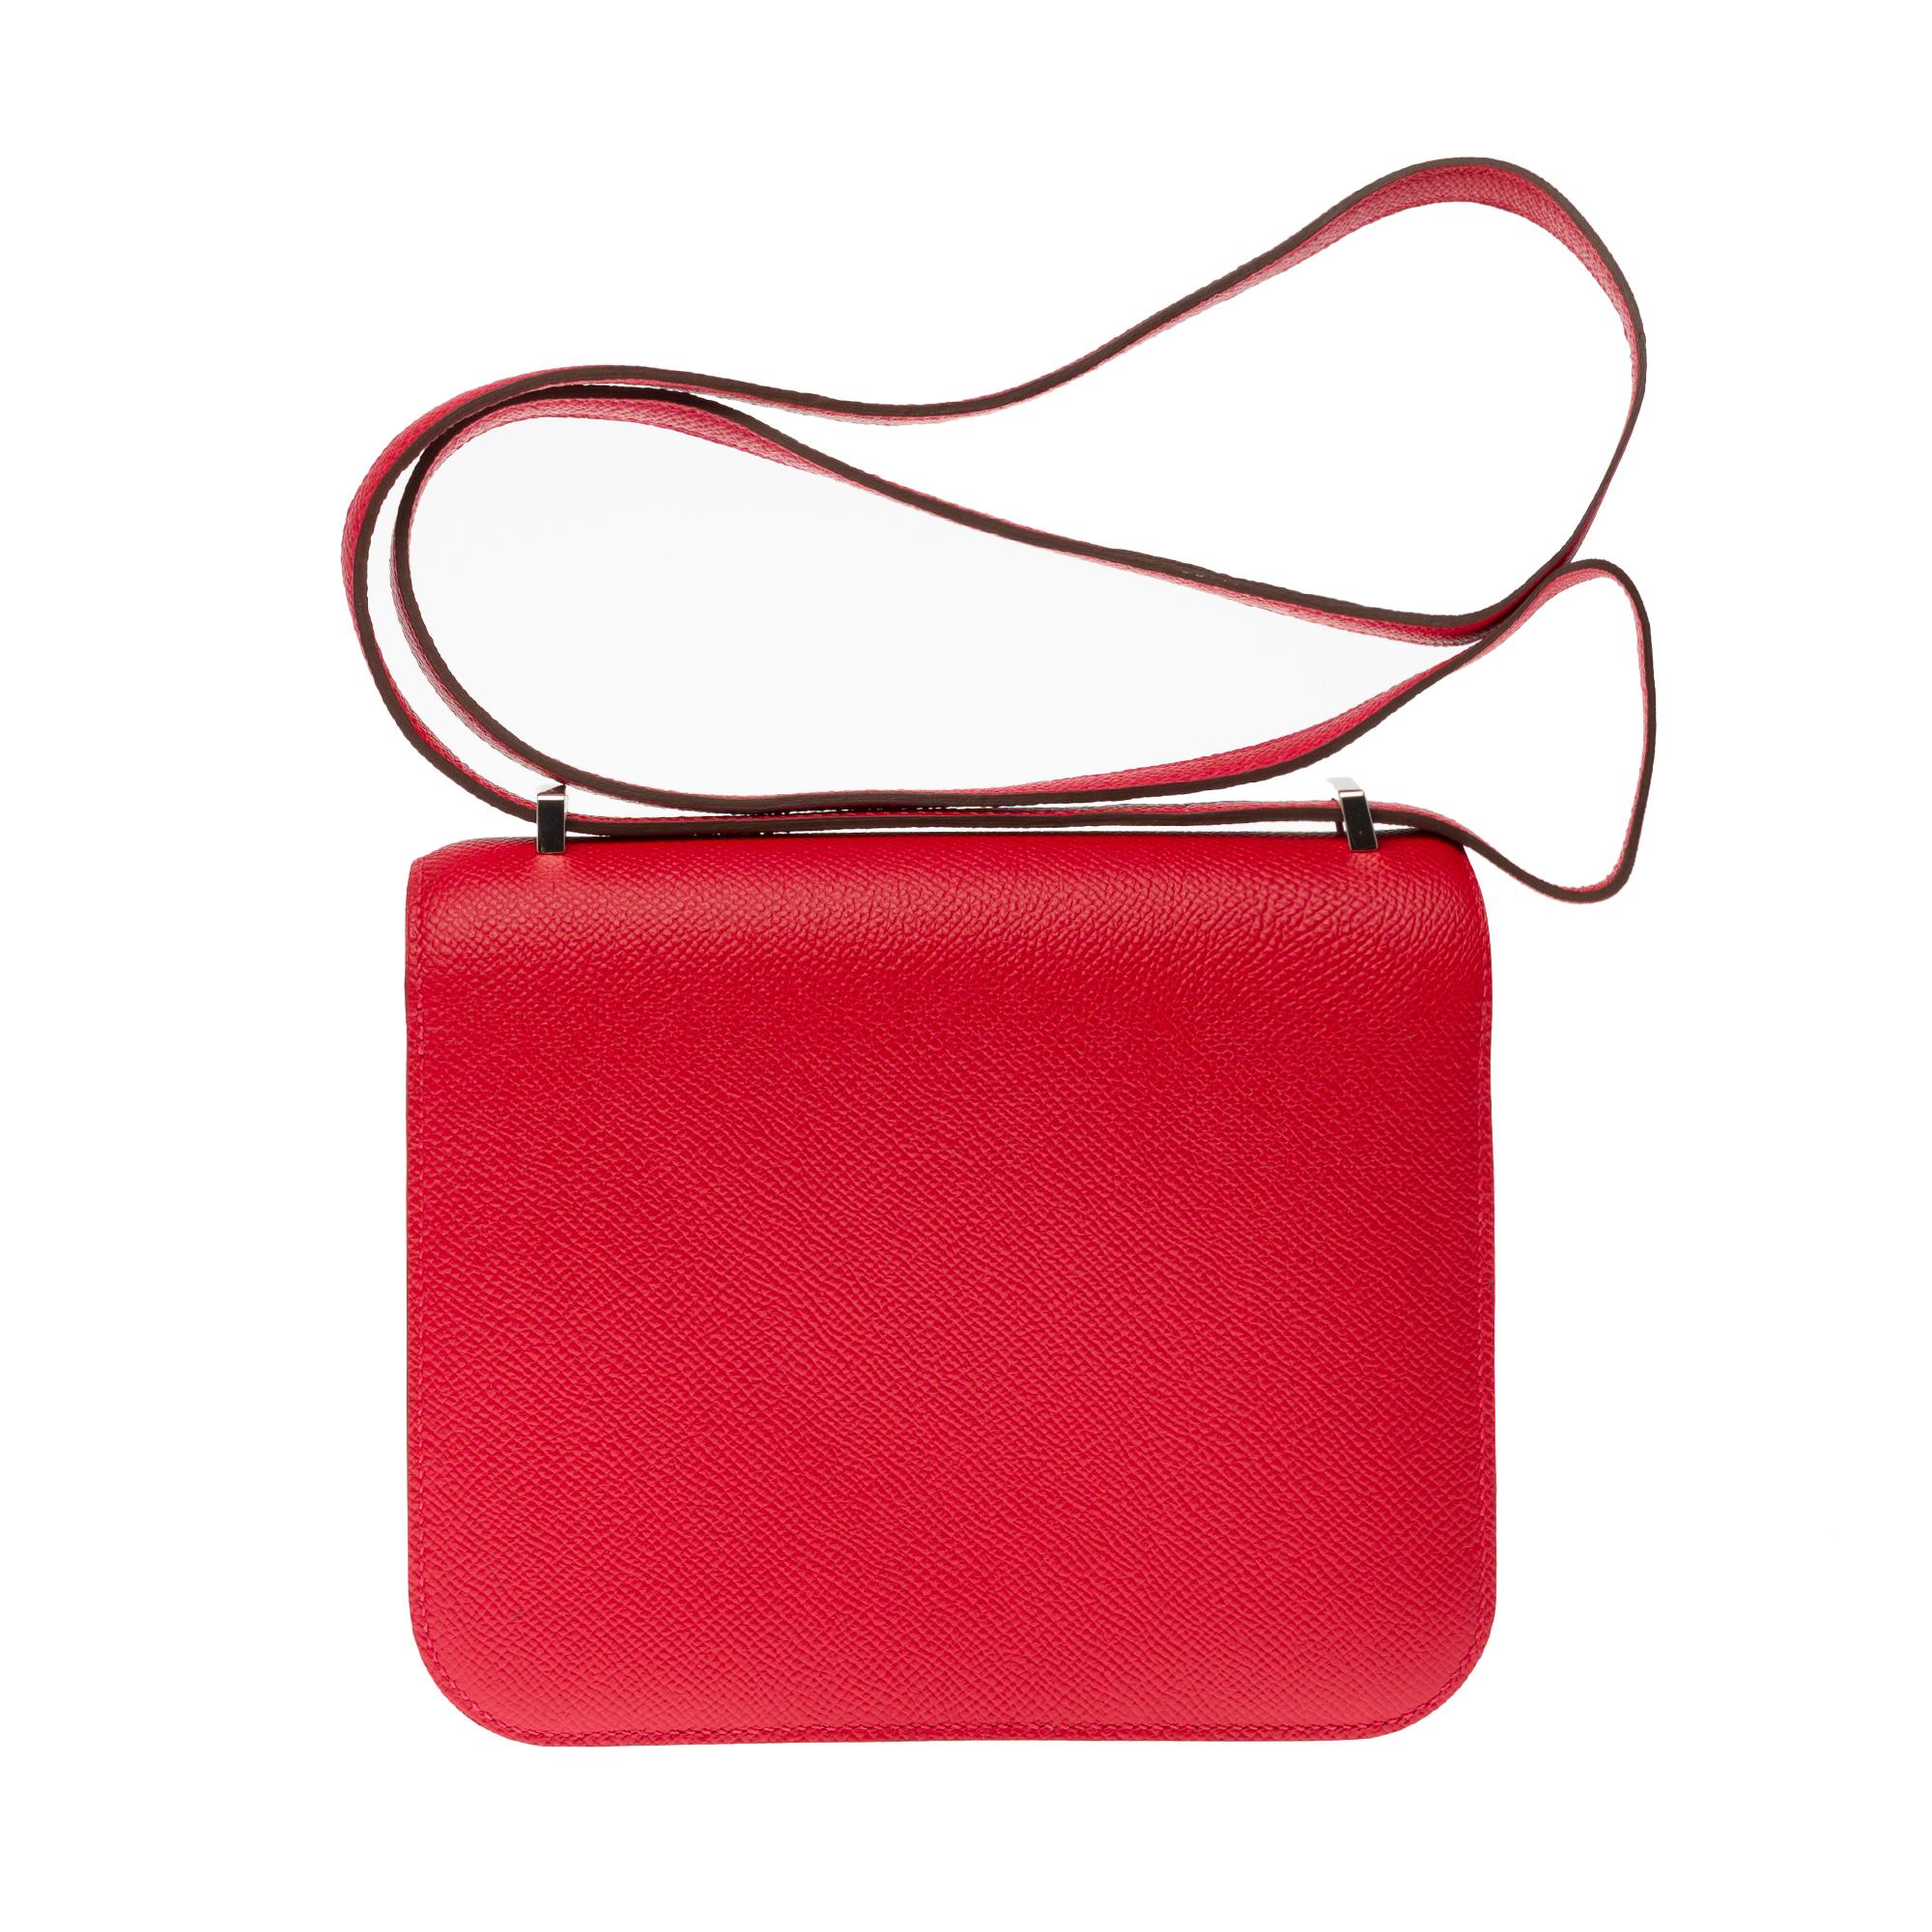 Splendid shoulder bag Hermes Constance III mini 18cm in rouge casaque epsom leather, embossed in silver palladium plated metal, a shoulder strap handle transformable into red epsom leather allowing a shoulder or shoulder strap.

Logo closure on